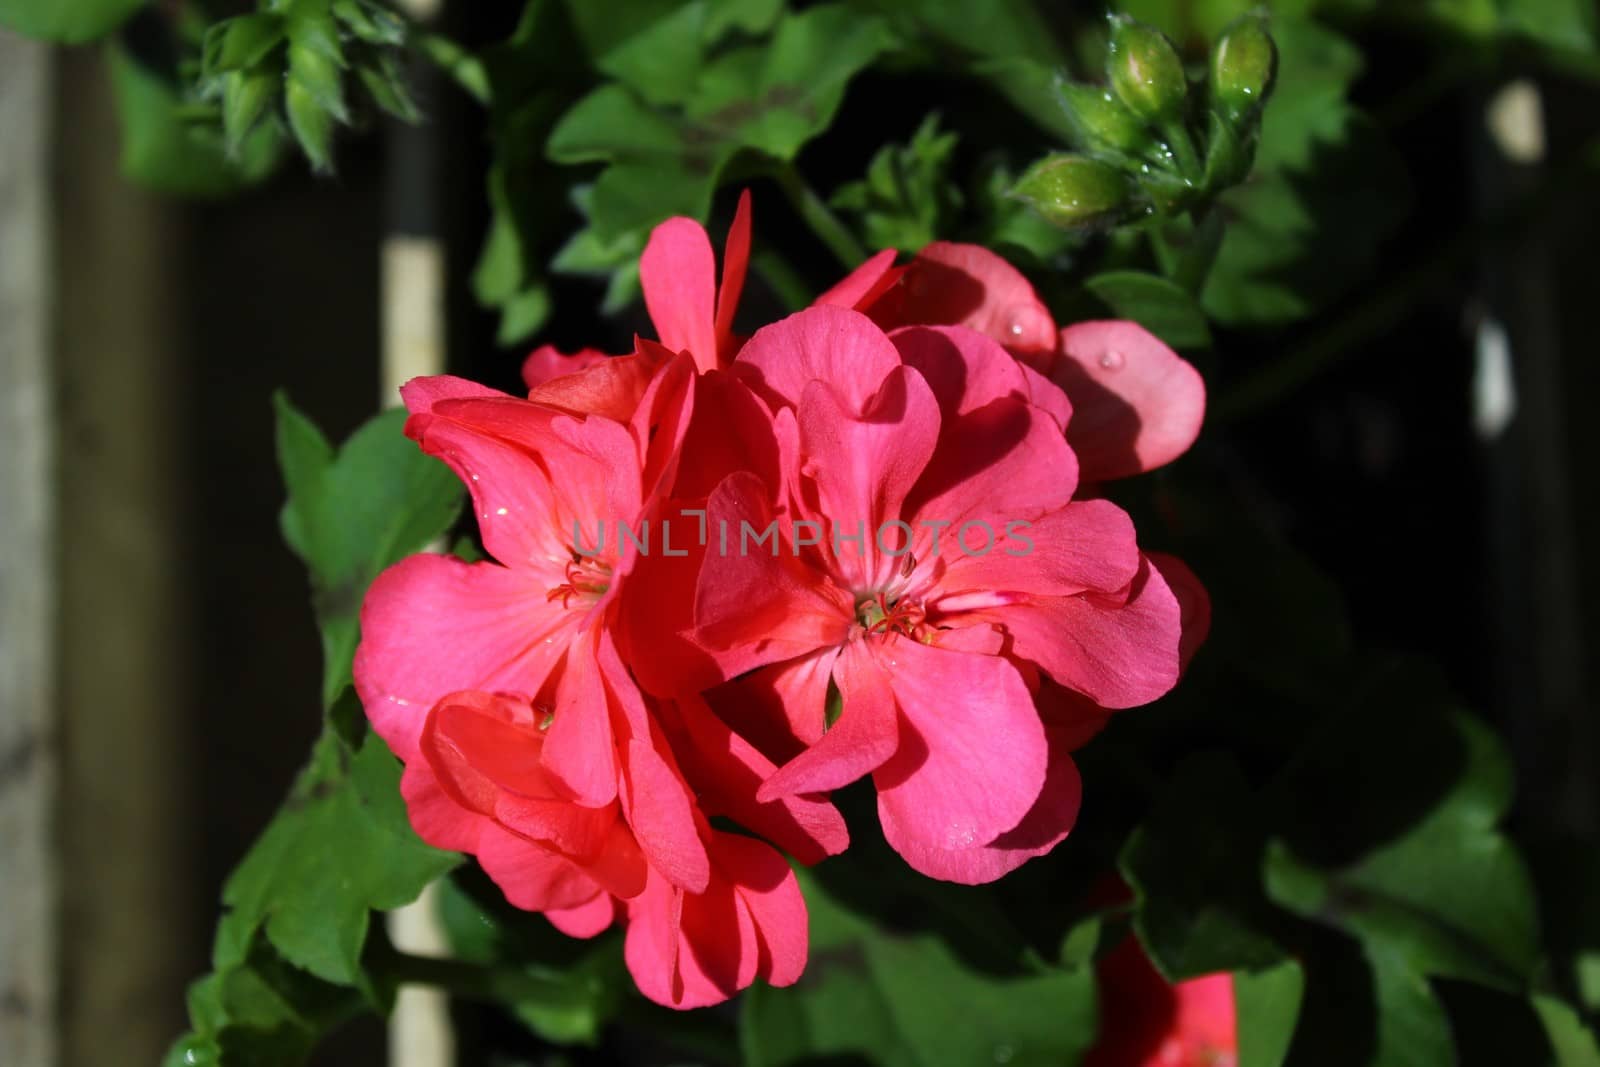 The picture shows a pelargonium webcap in the garden